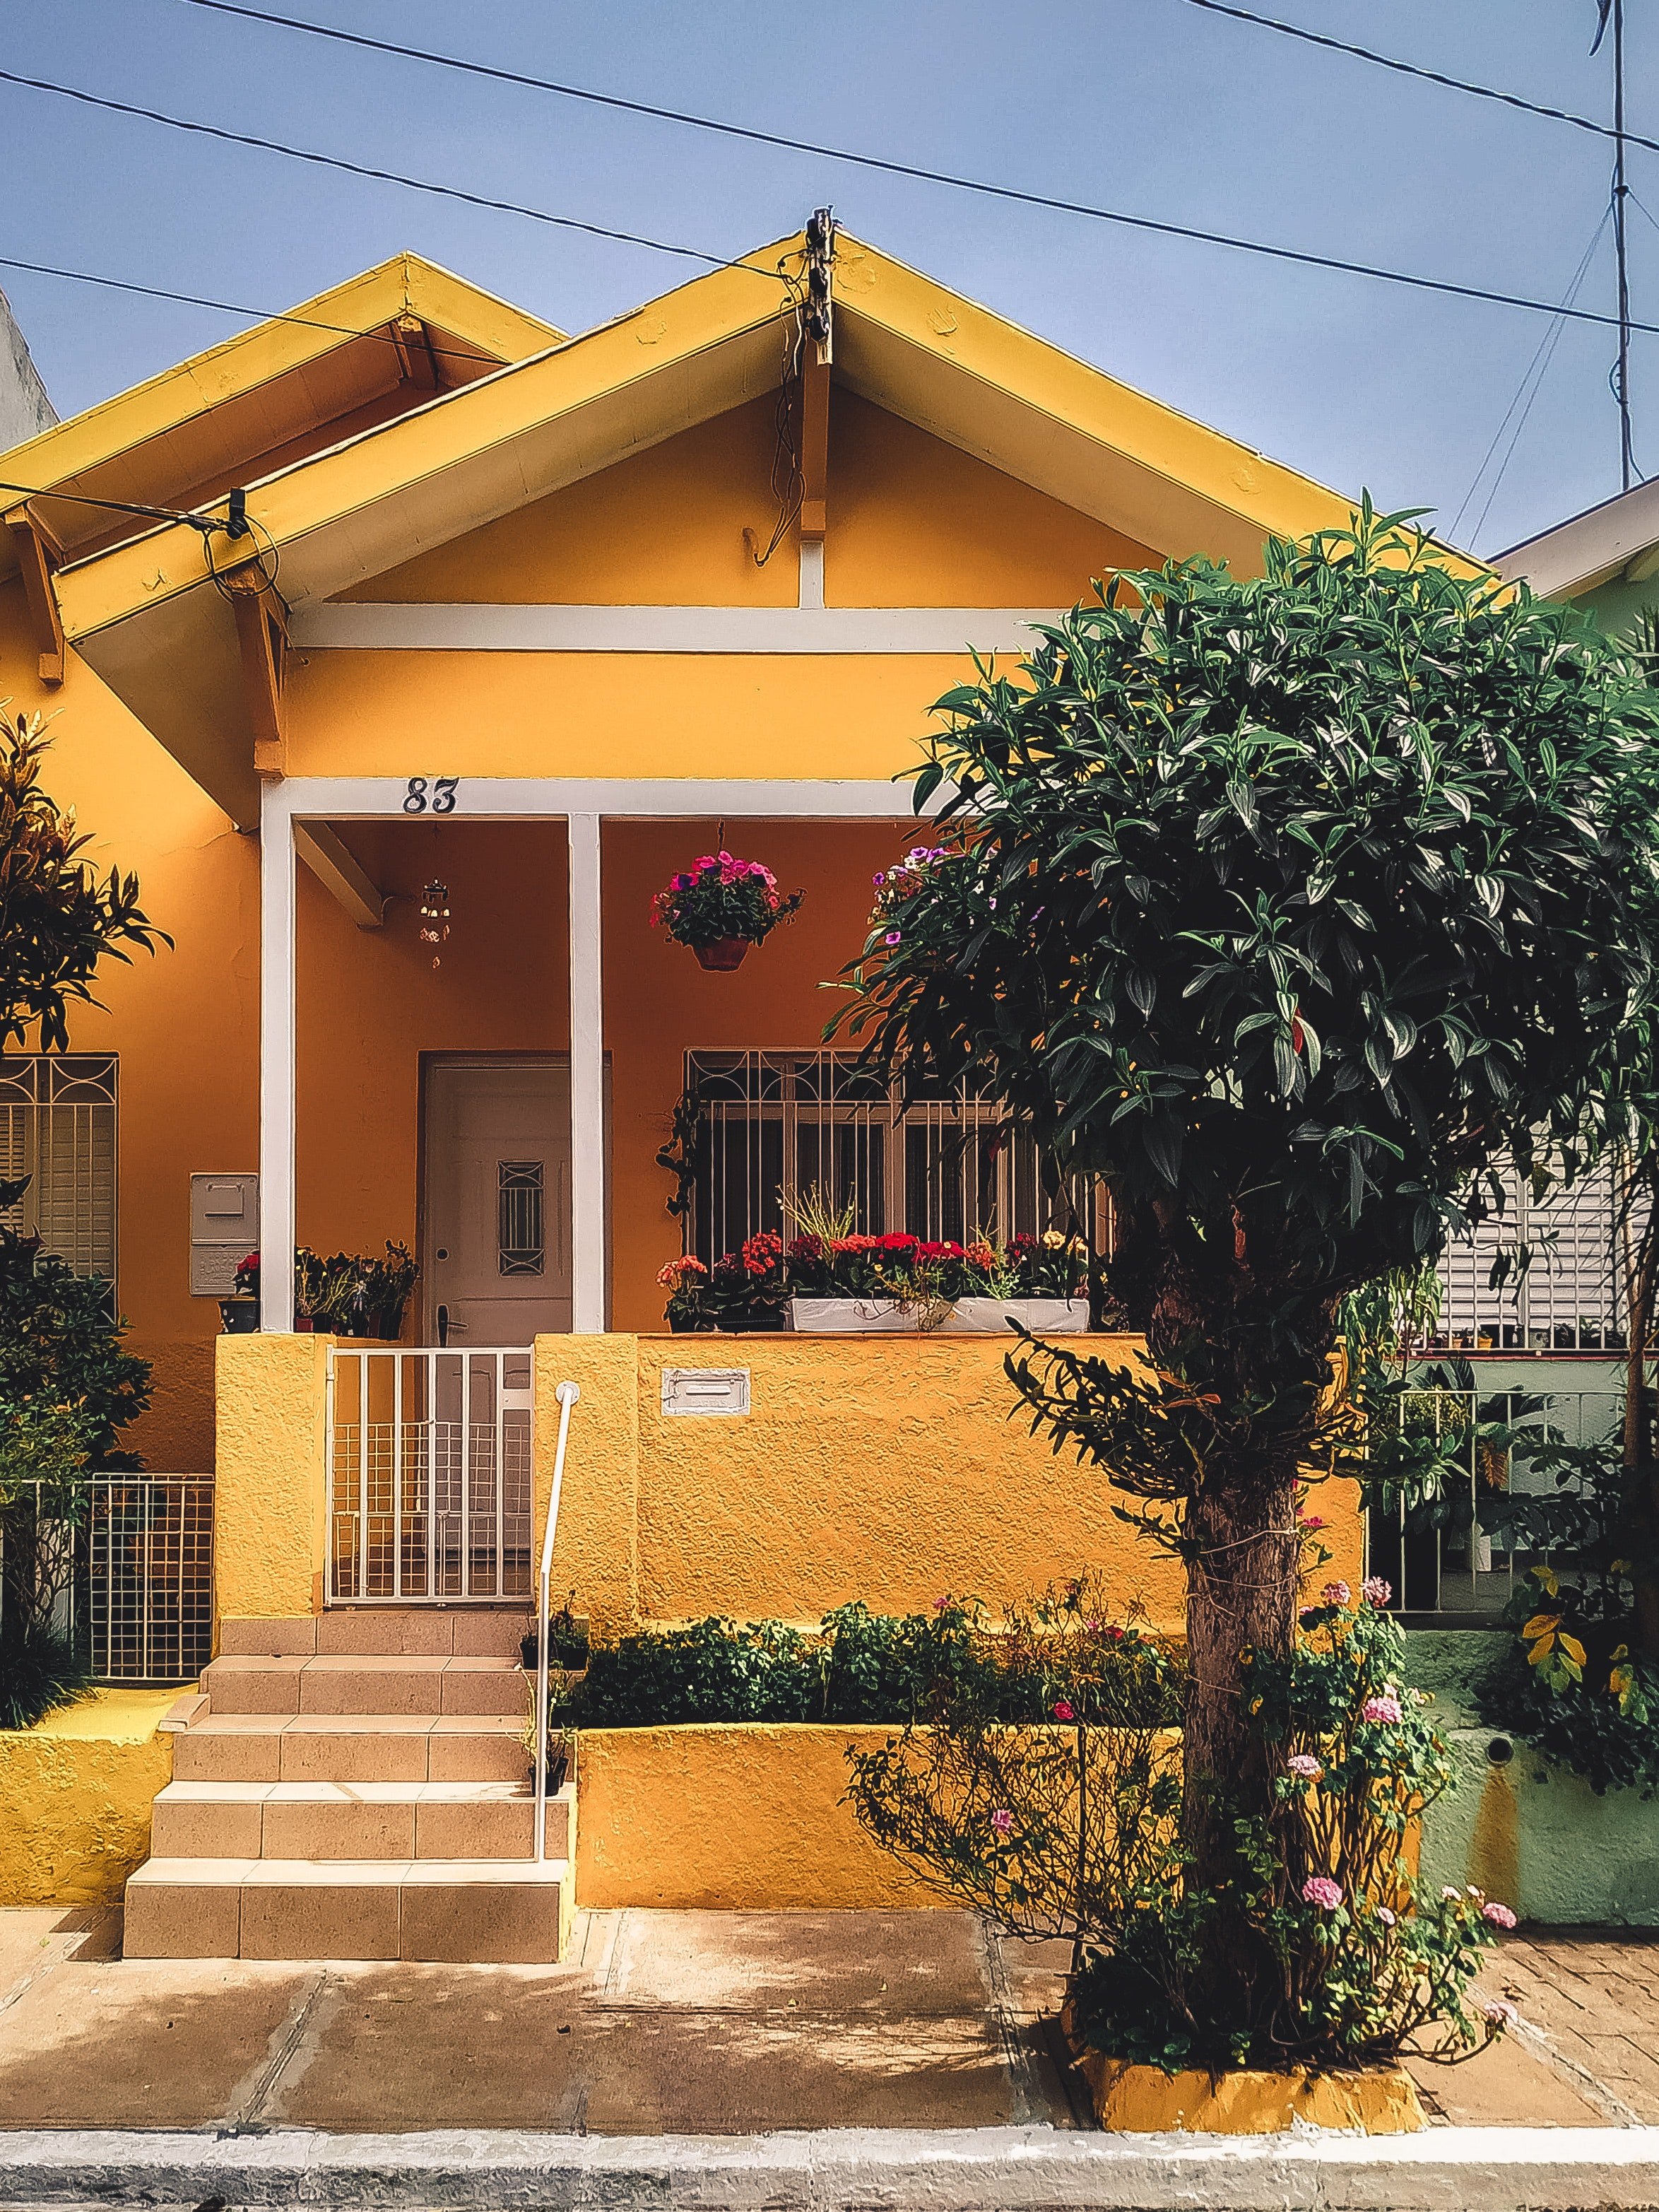 A yellow house | Source: Pexels